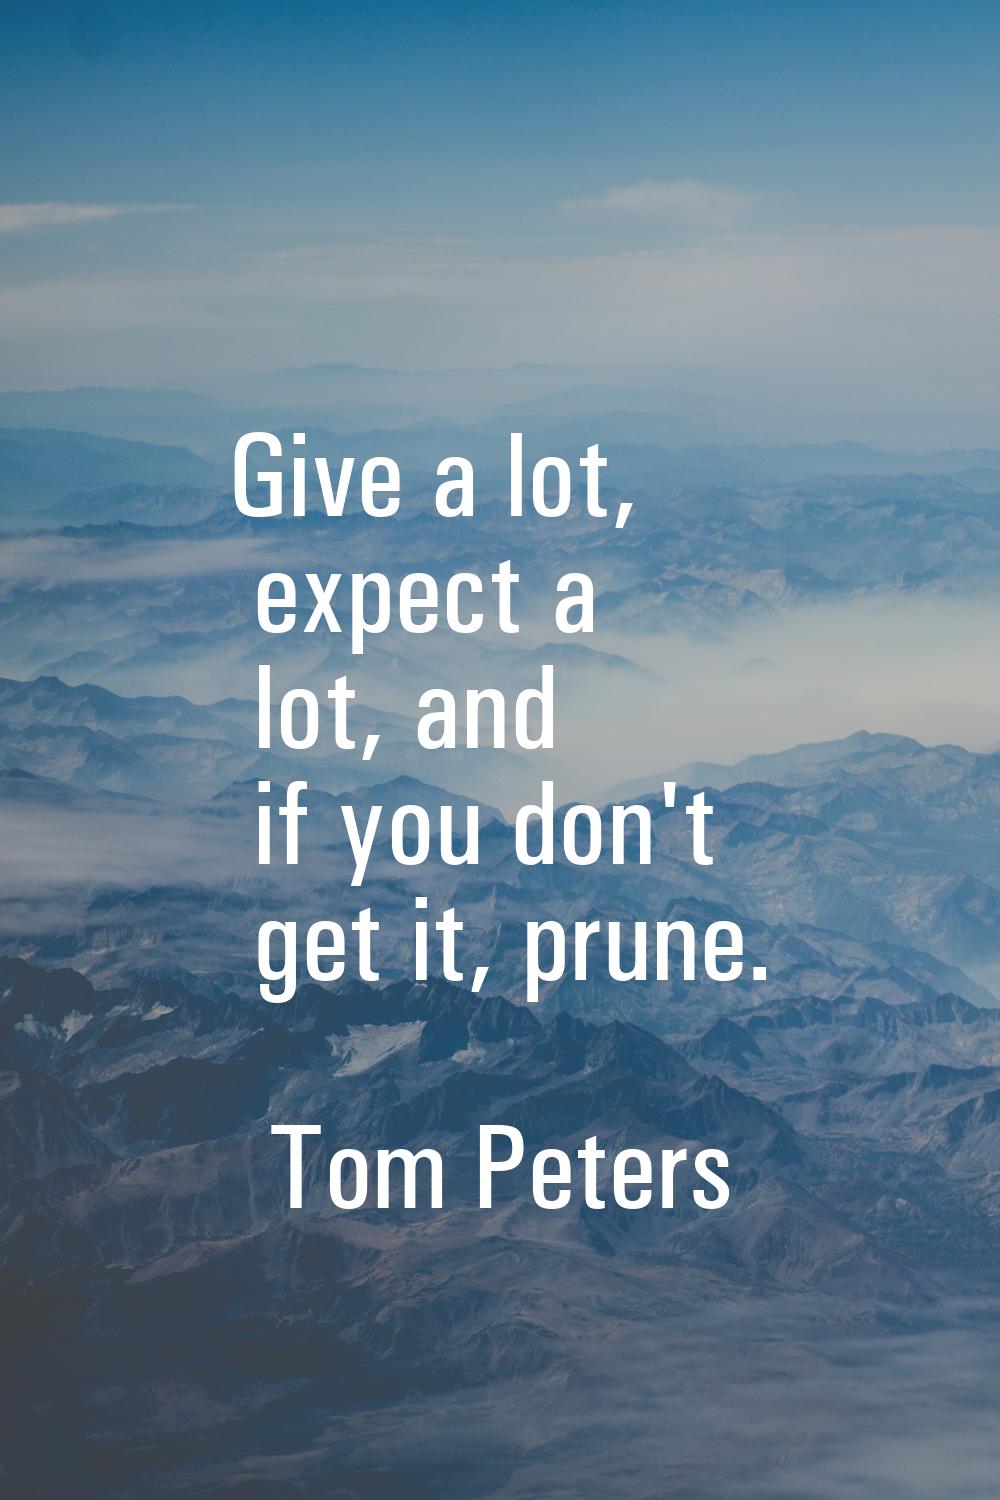 Give a lot, expect a lot, and if you don't get it, prune.